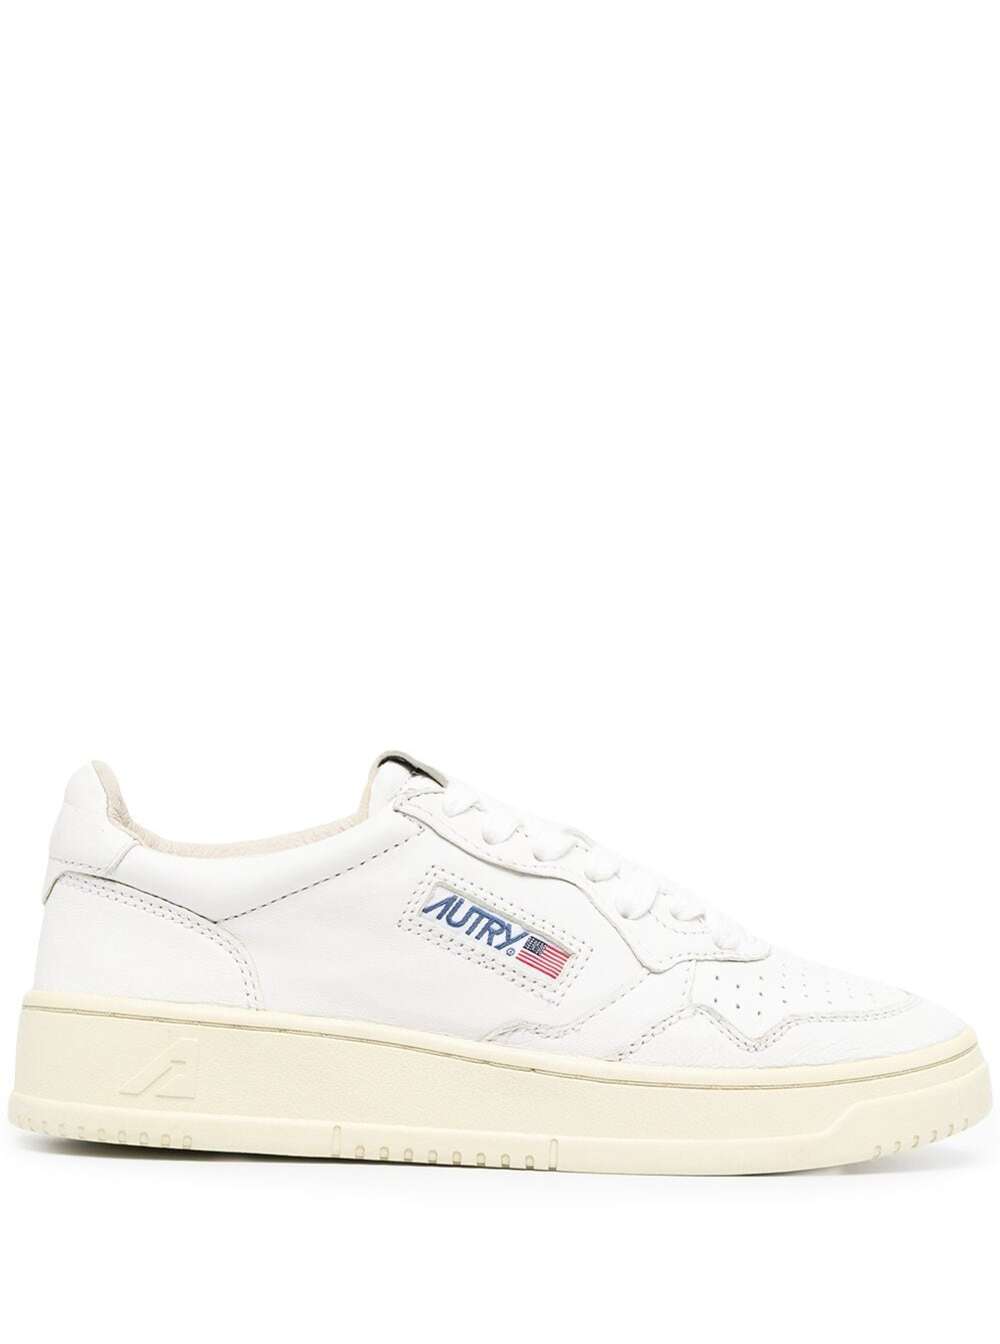 AUTRY WHITE LEATHER SNEAKERS WITH LOGO AUTRY WOMAN